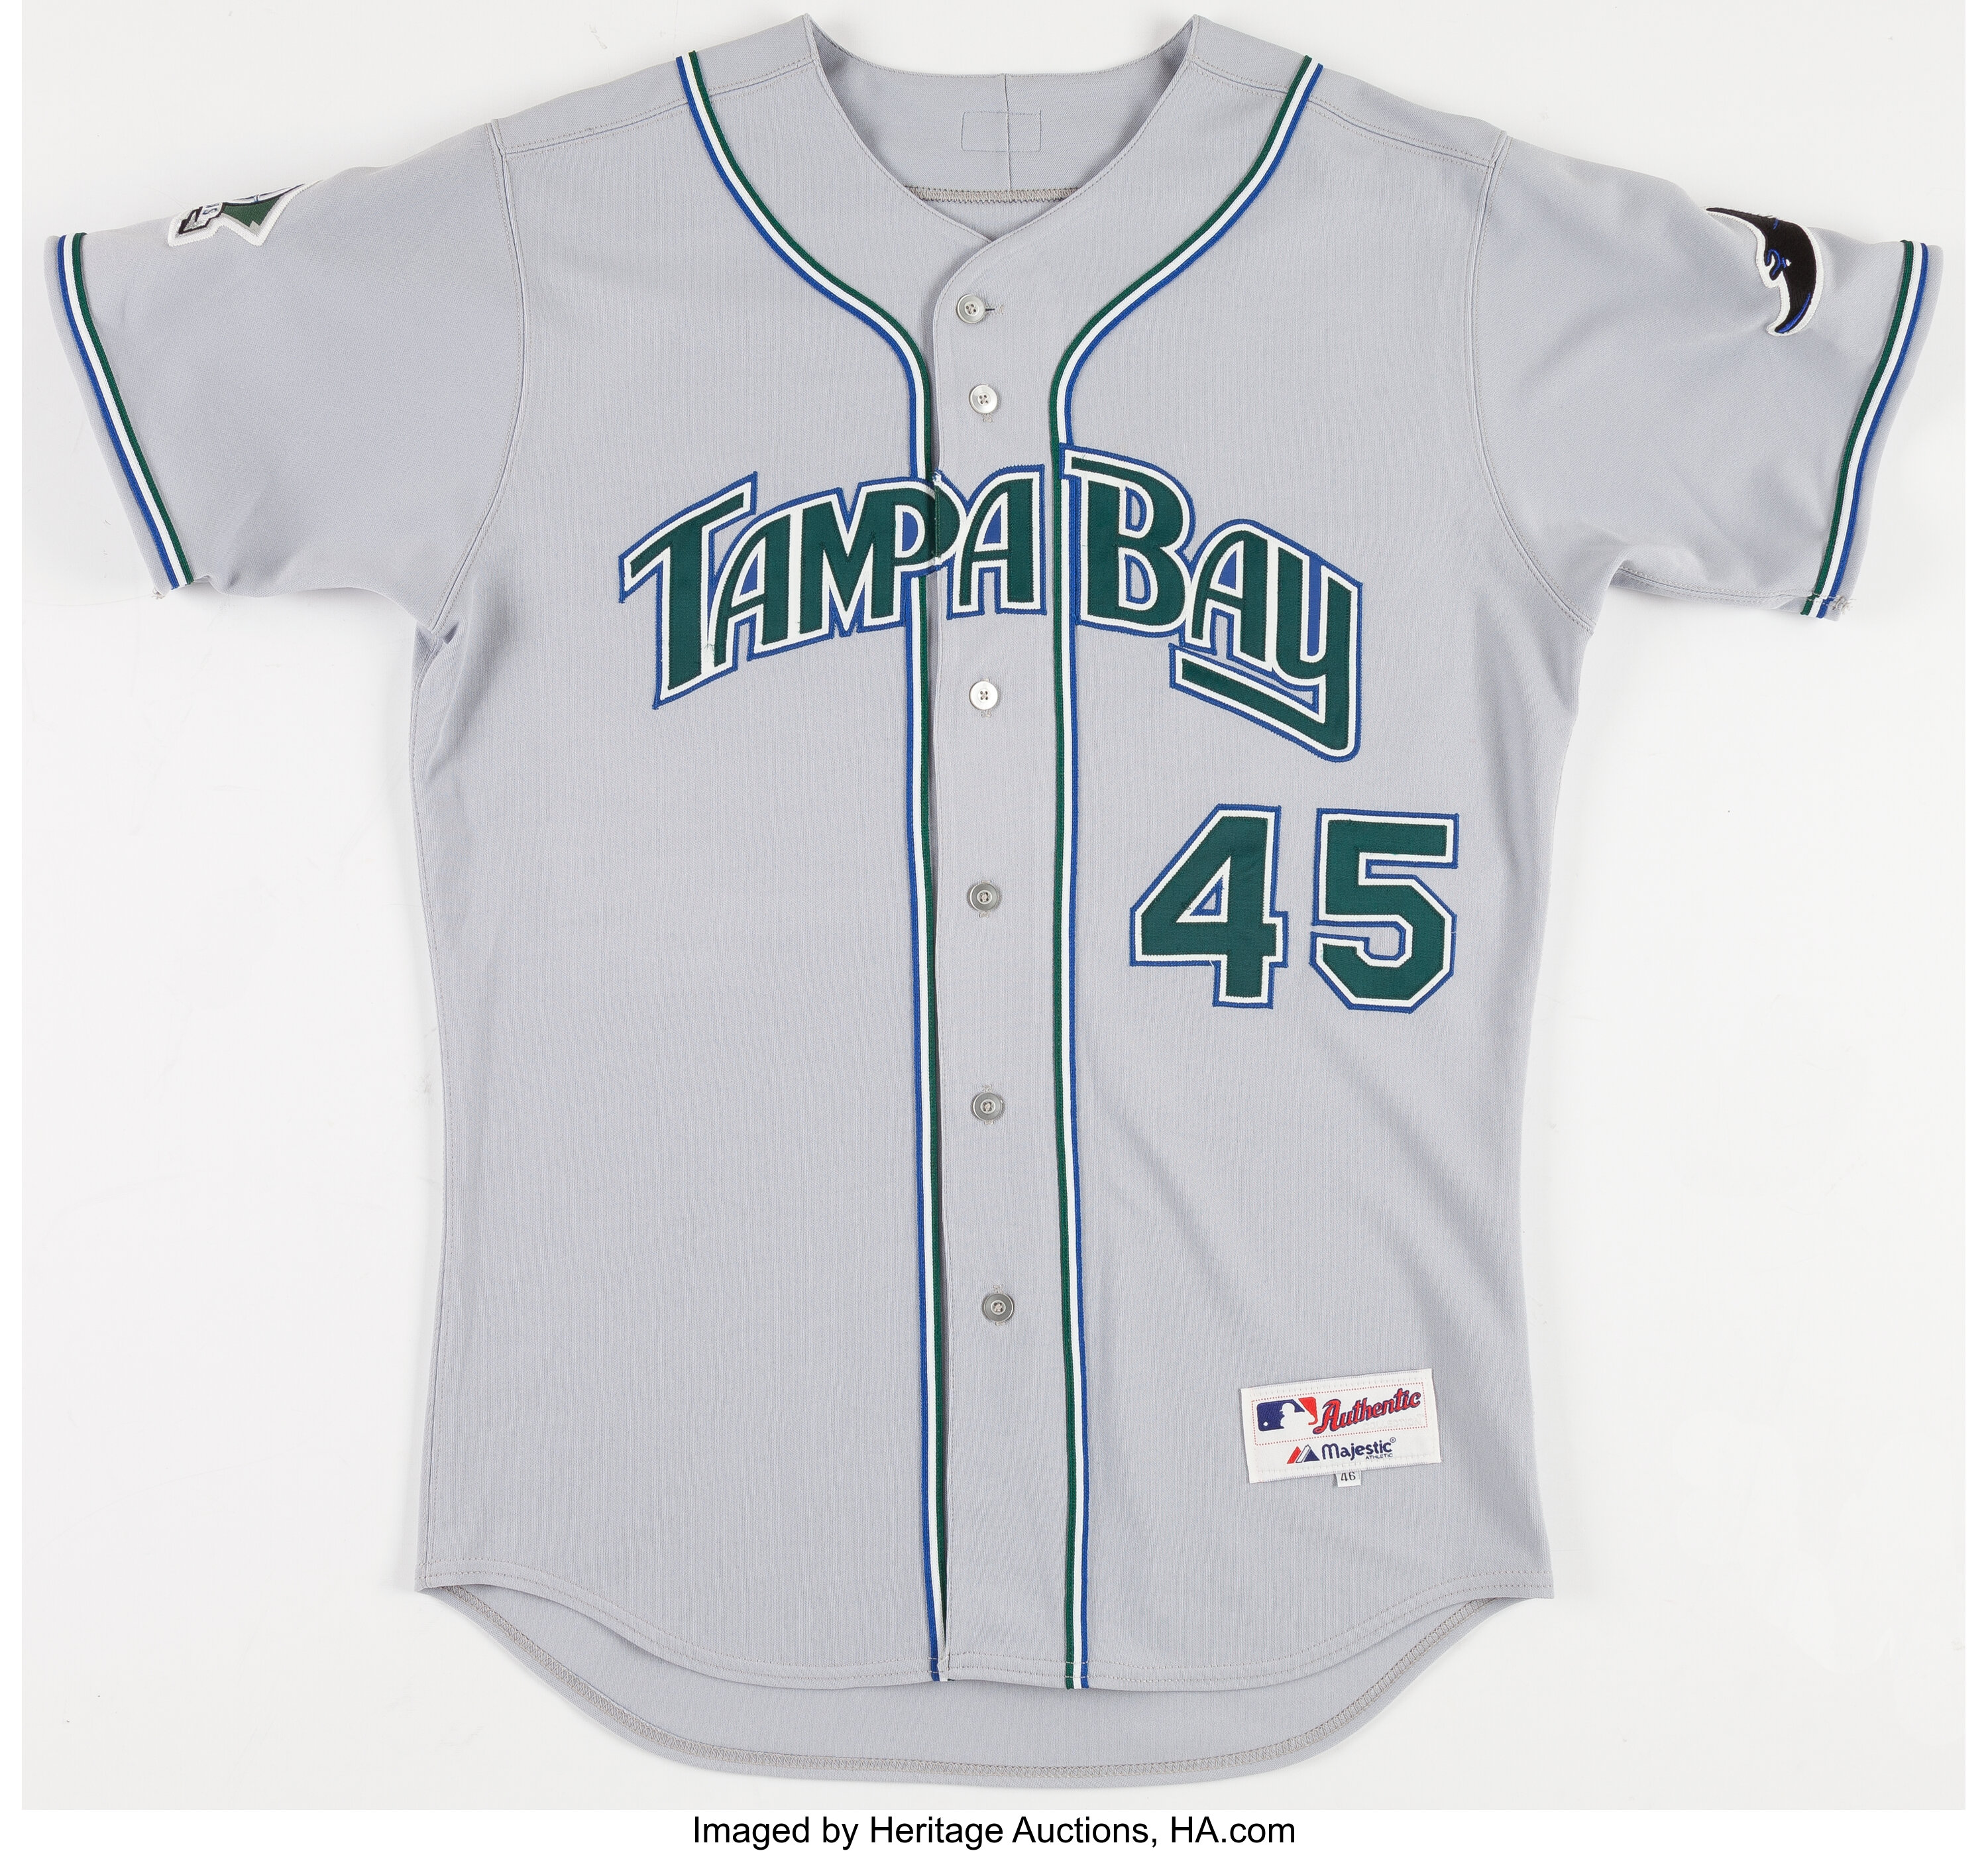 RAYS COOPERSTOWN REPLICA DEVIL RAYS JERSEY-ALTERNATE – The Bay Republic